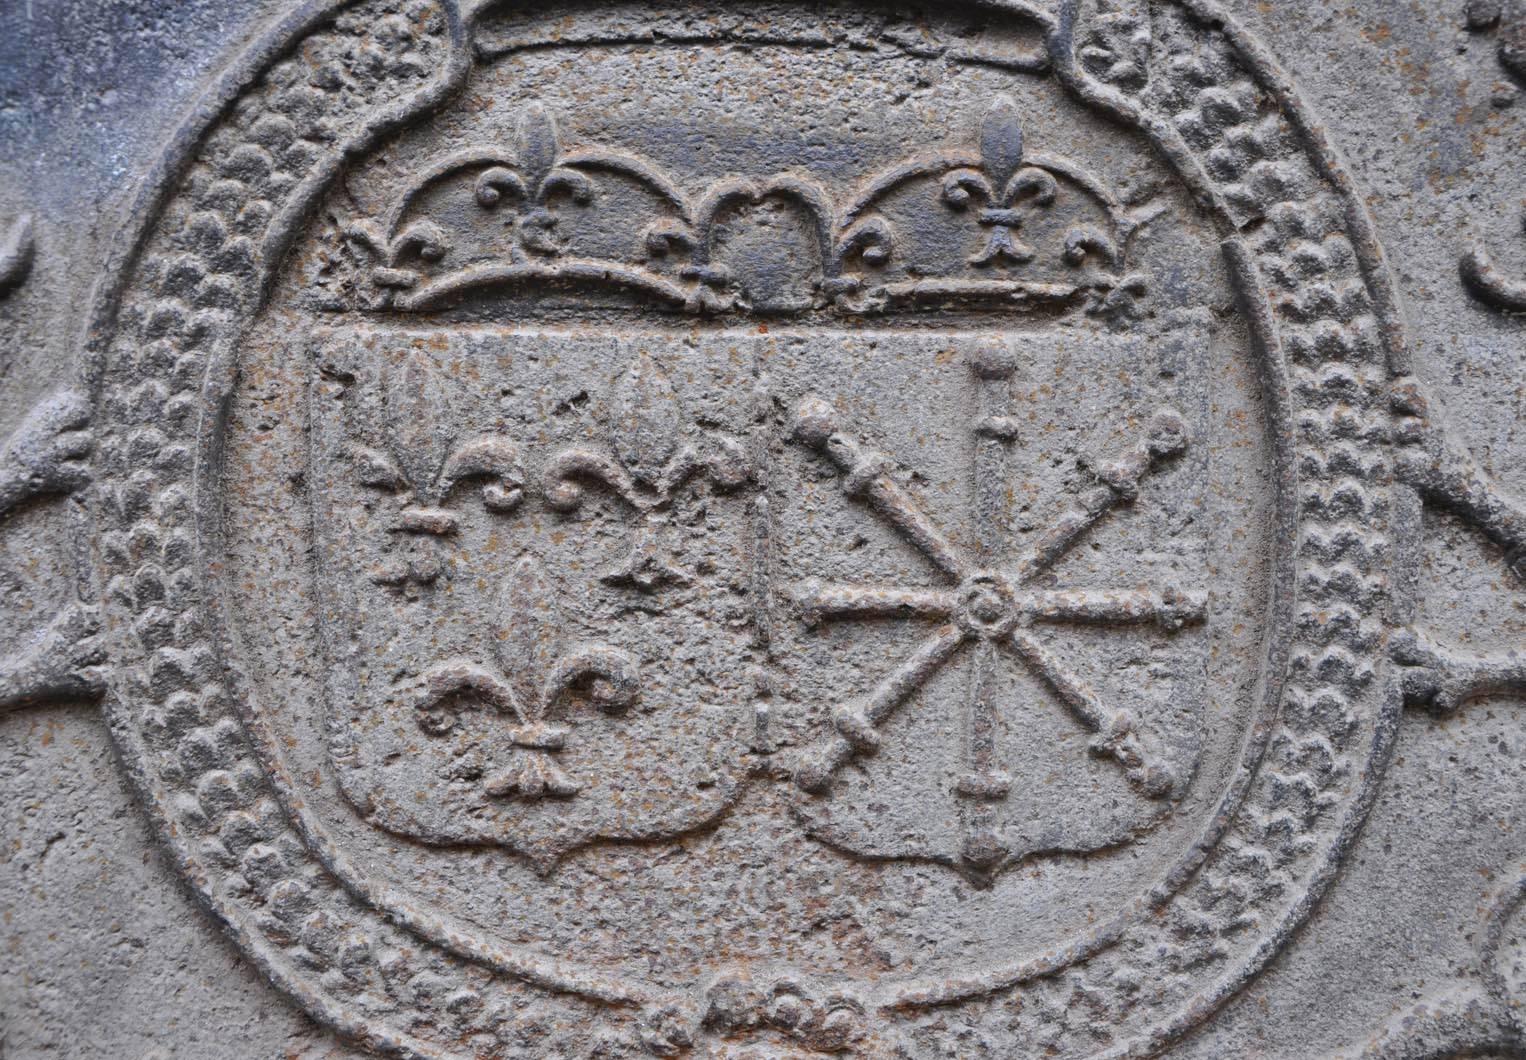 This antique cast iron fireback was made in the 18th century. The France and Navarre coat of arms are represented, surrounded by two lions, in a medallion decorated with a crown.